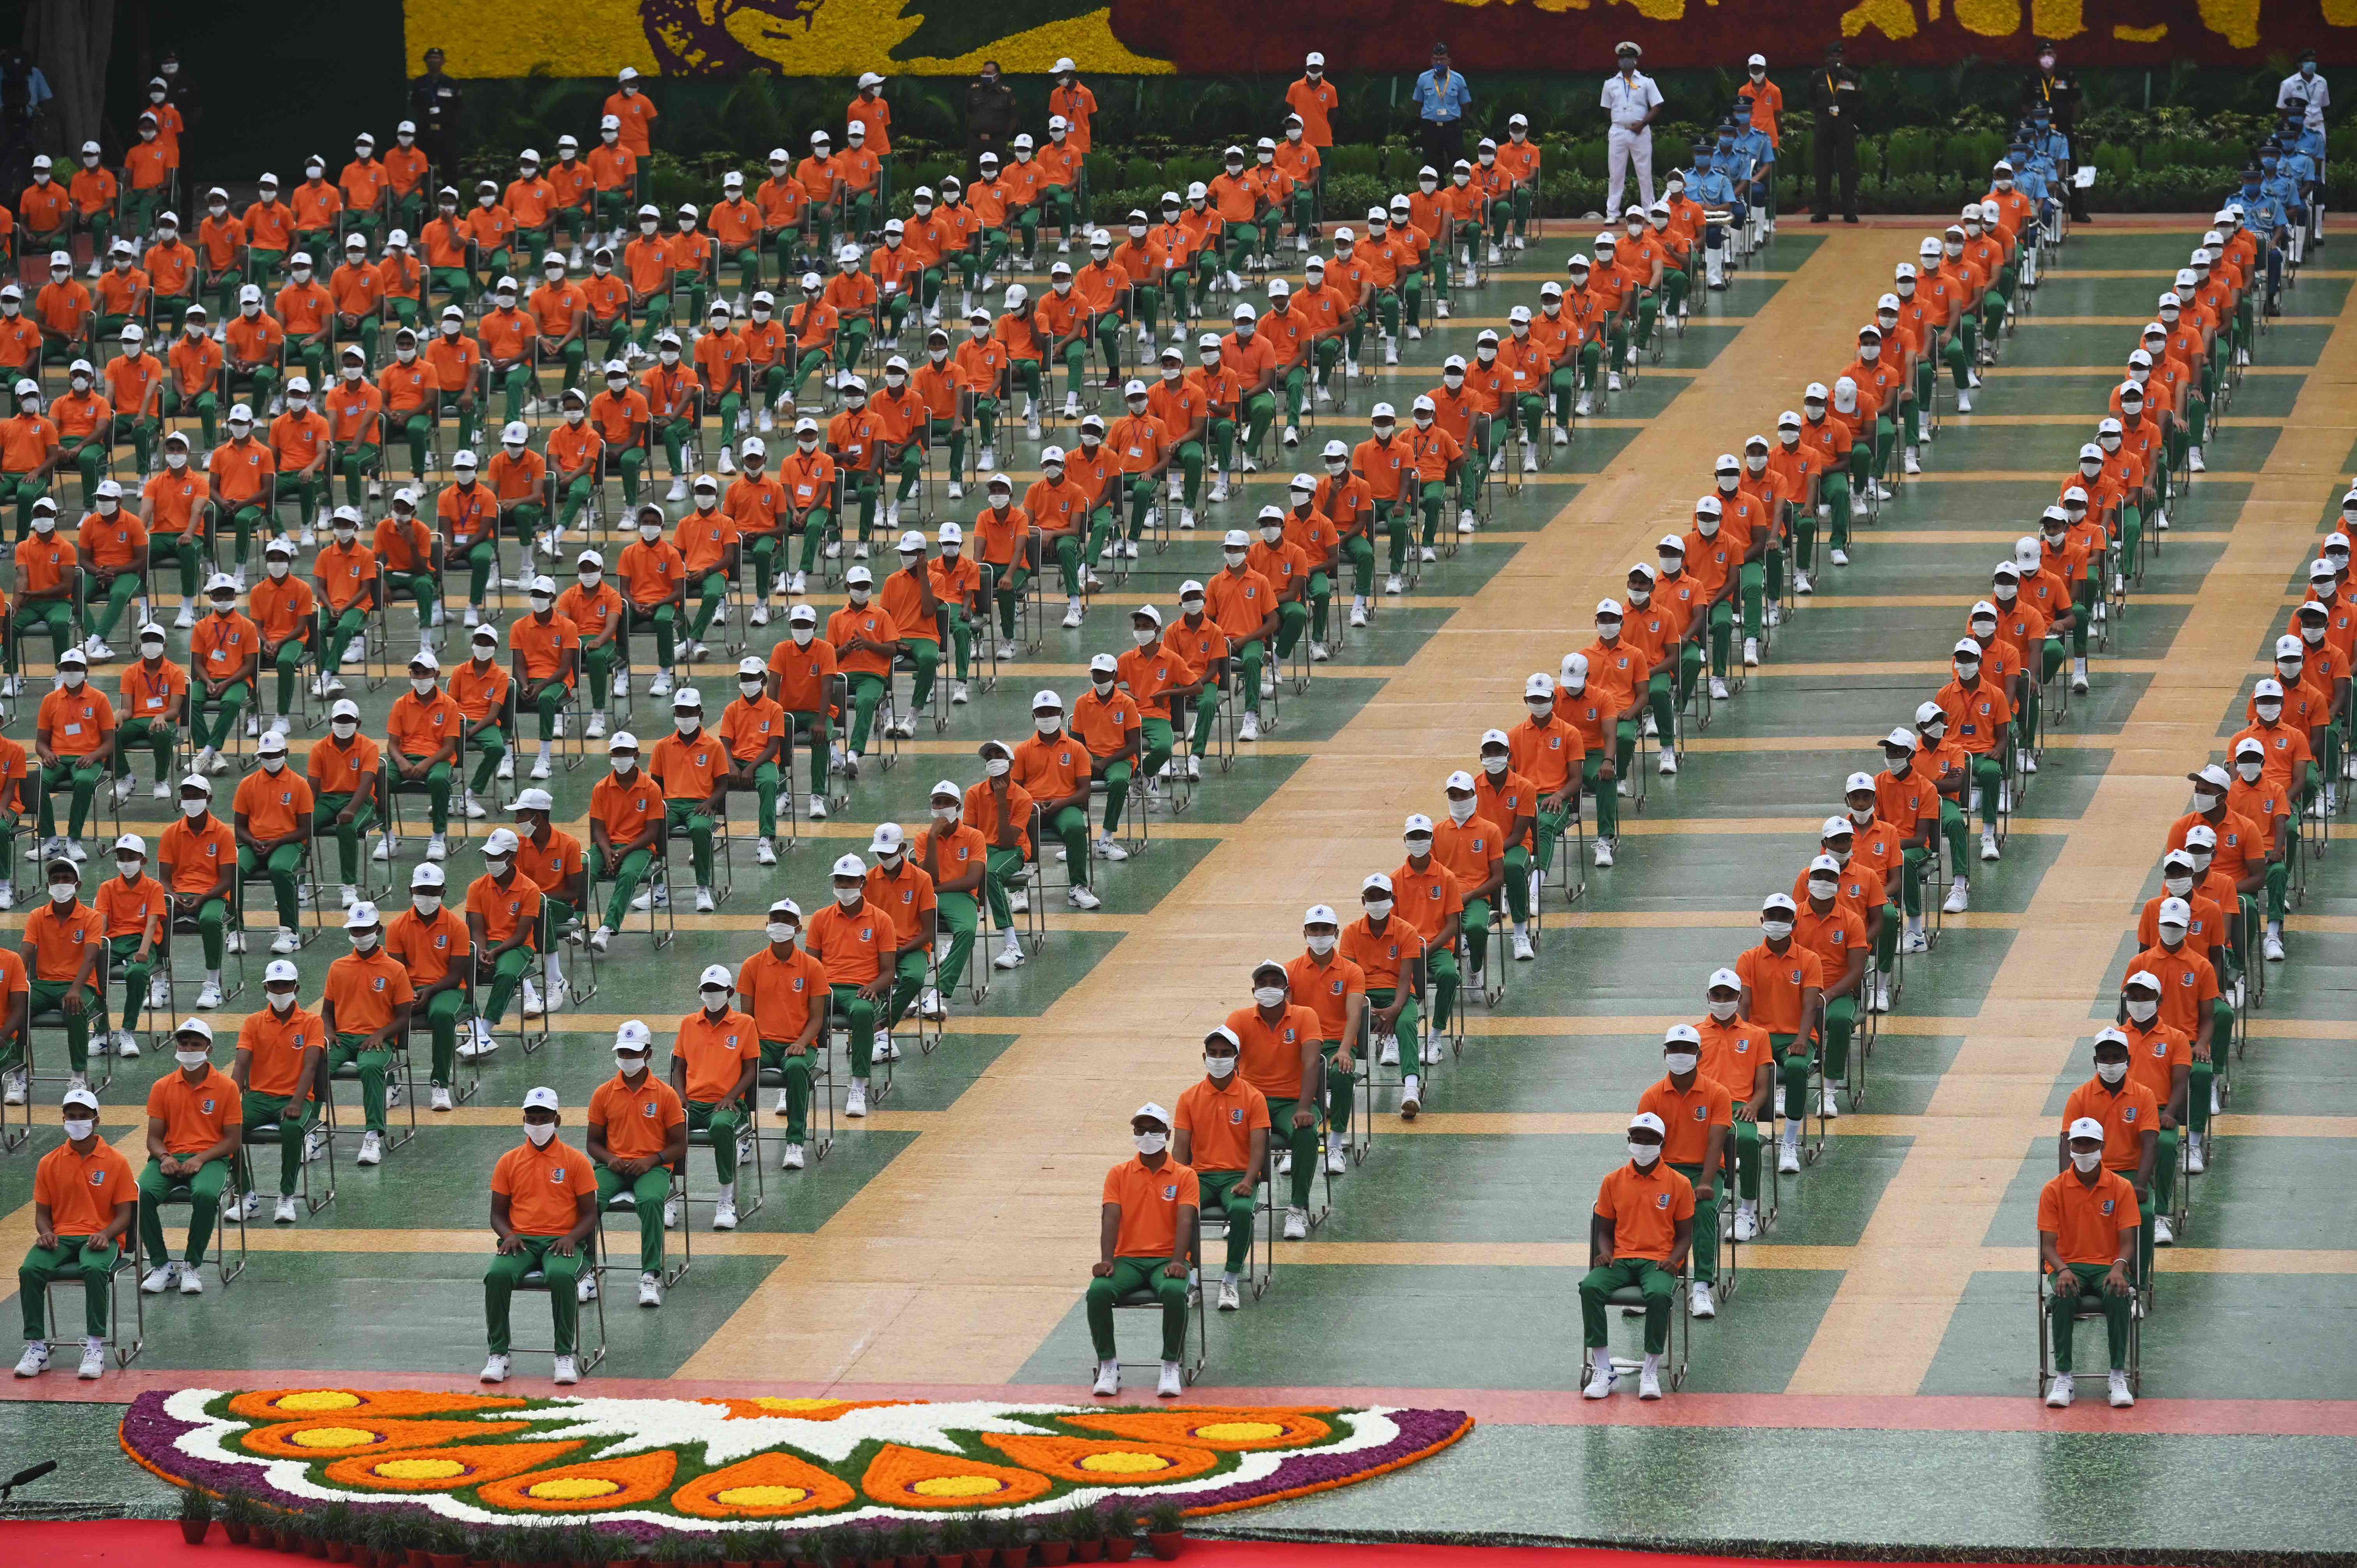 Pictures from India's 74th Independence Day celebration